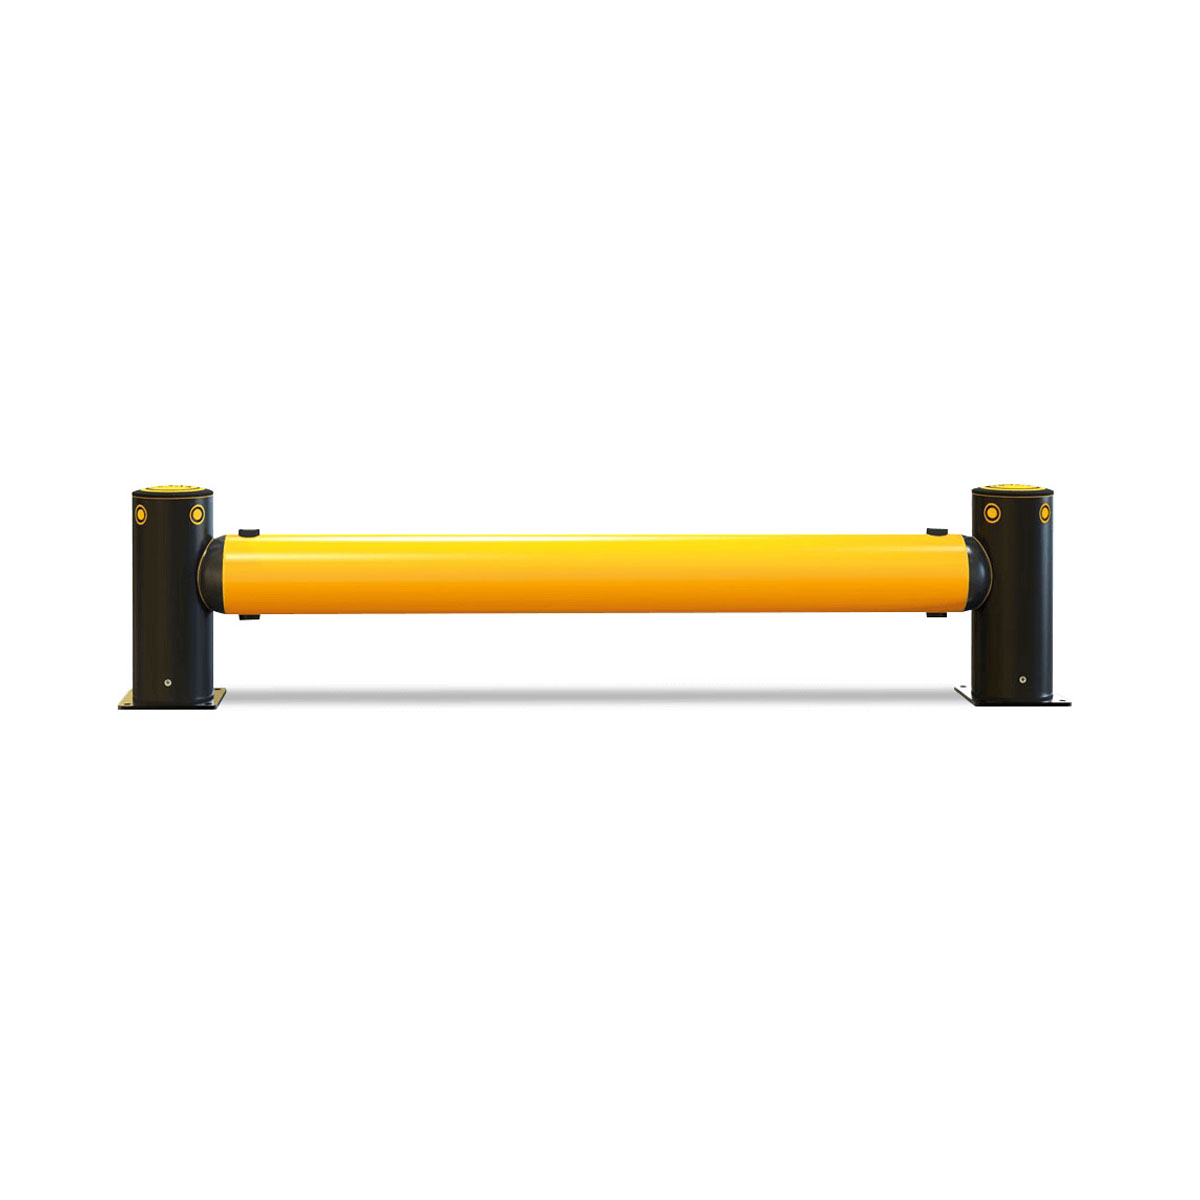 Buy Traffic Barrier - A-Safe (Flexible Plastic) in Traffic Barriers from A-Safe available at Astrolift NZ